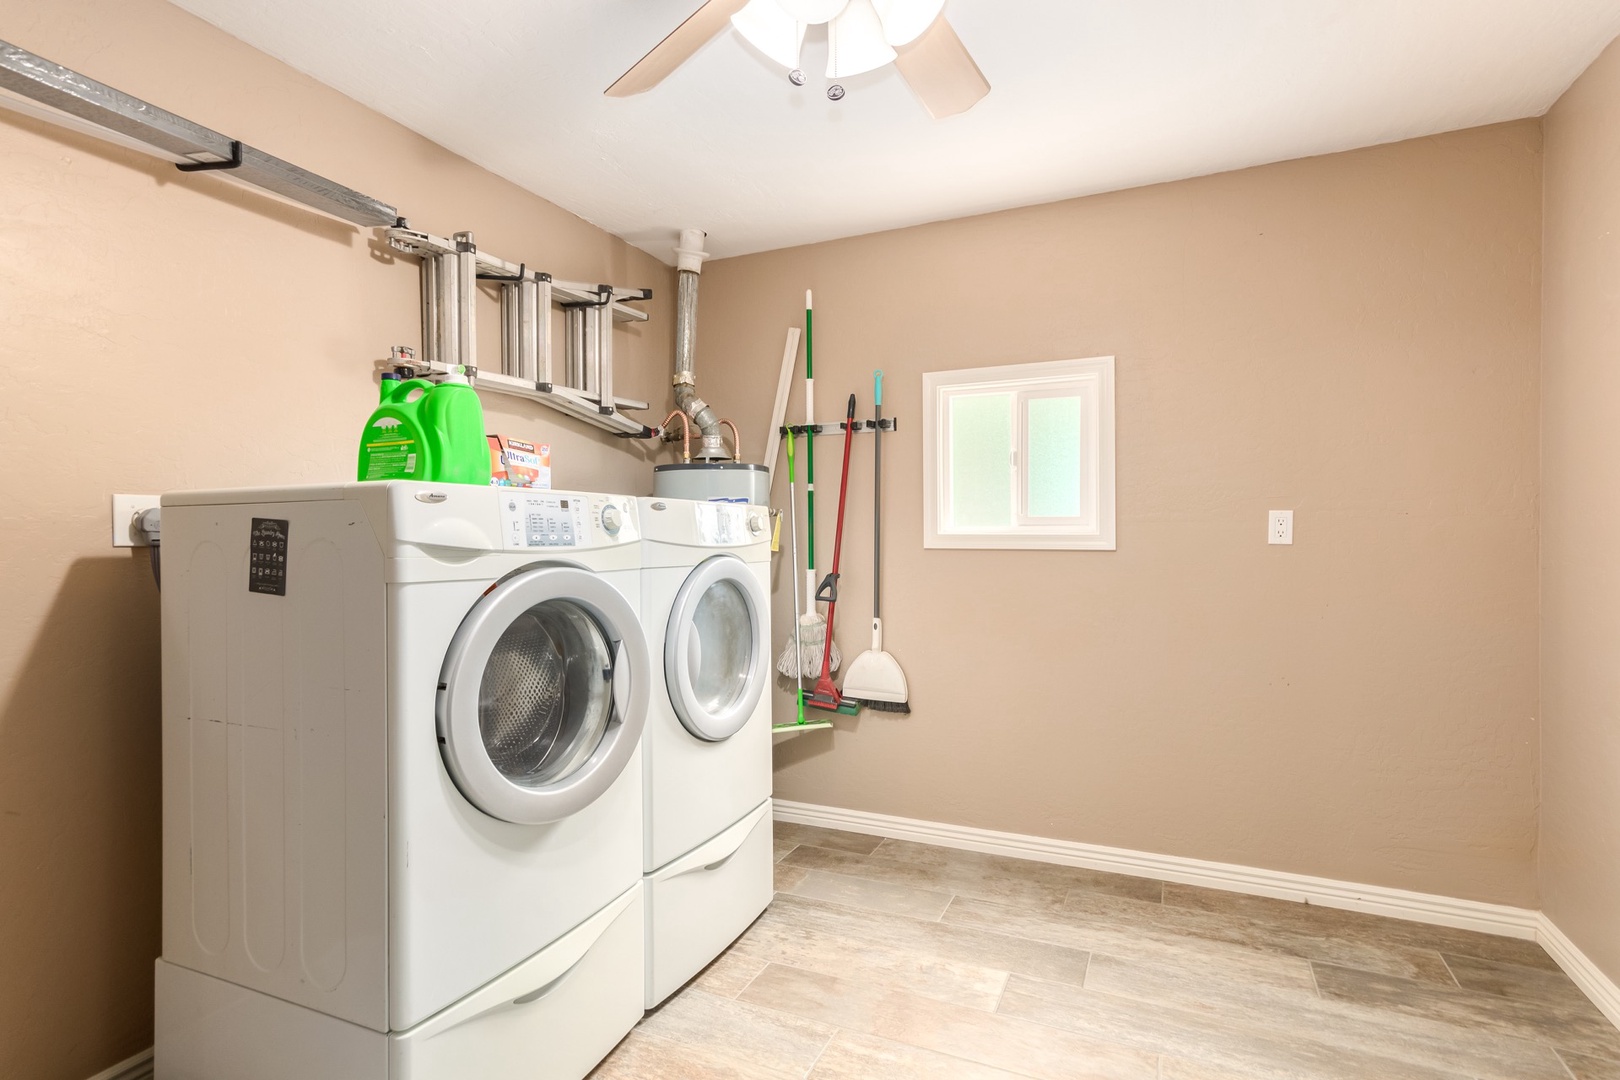 Washer & Dryer with complimentary detergent